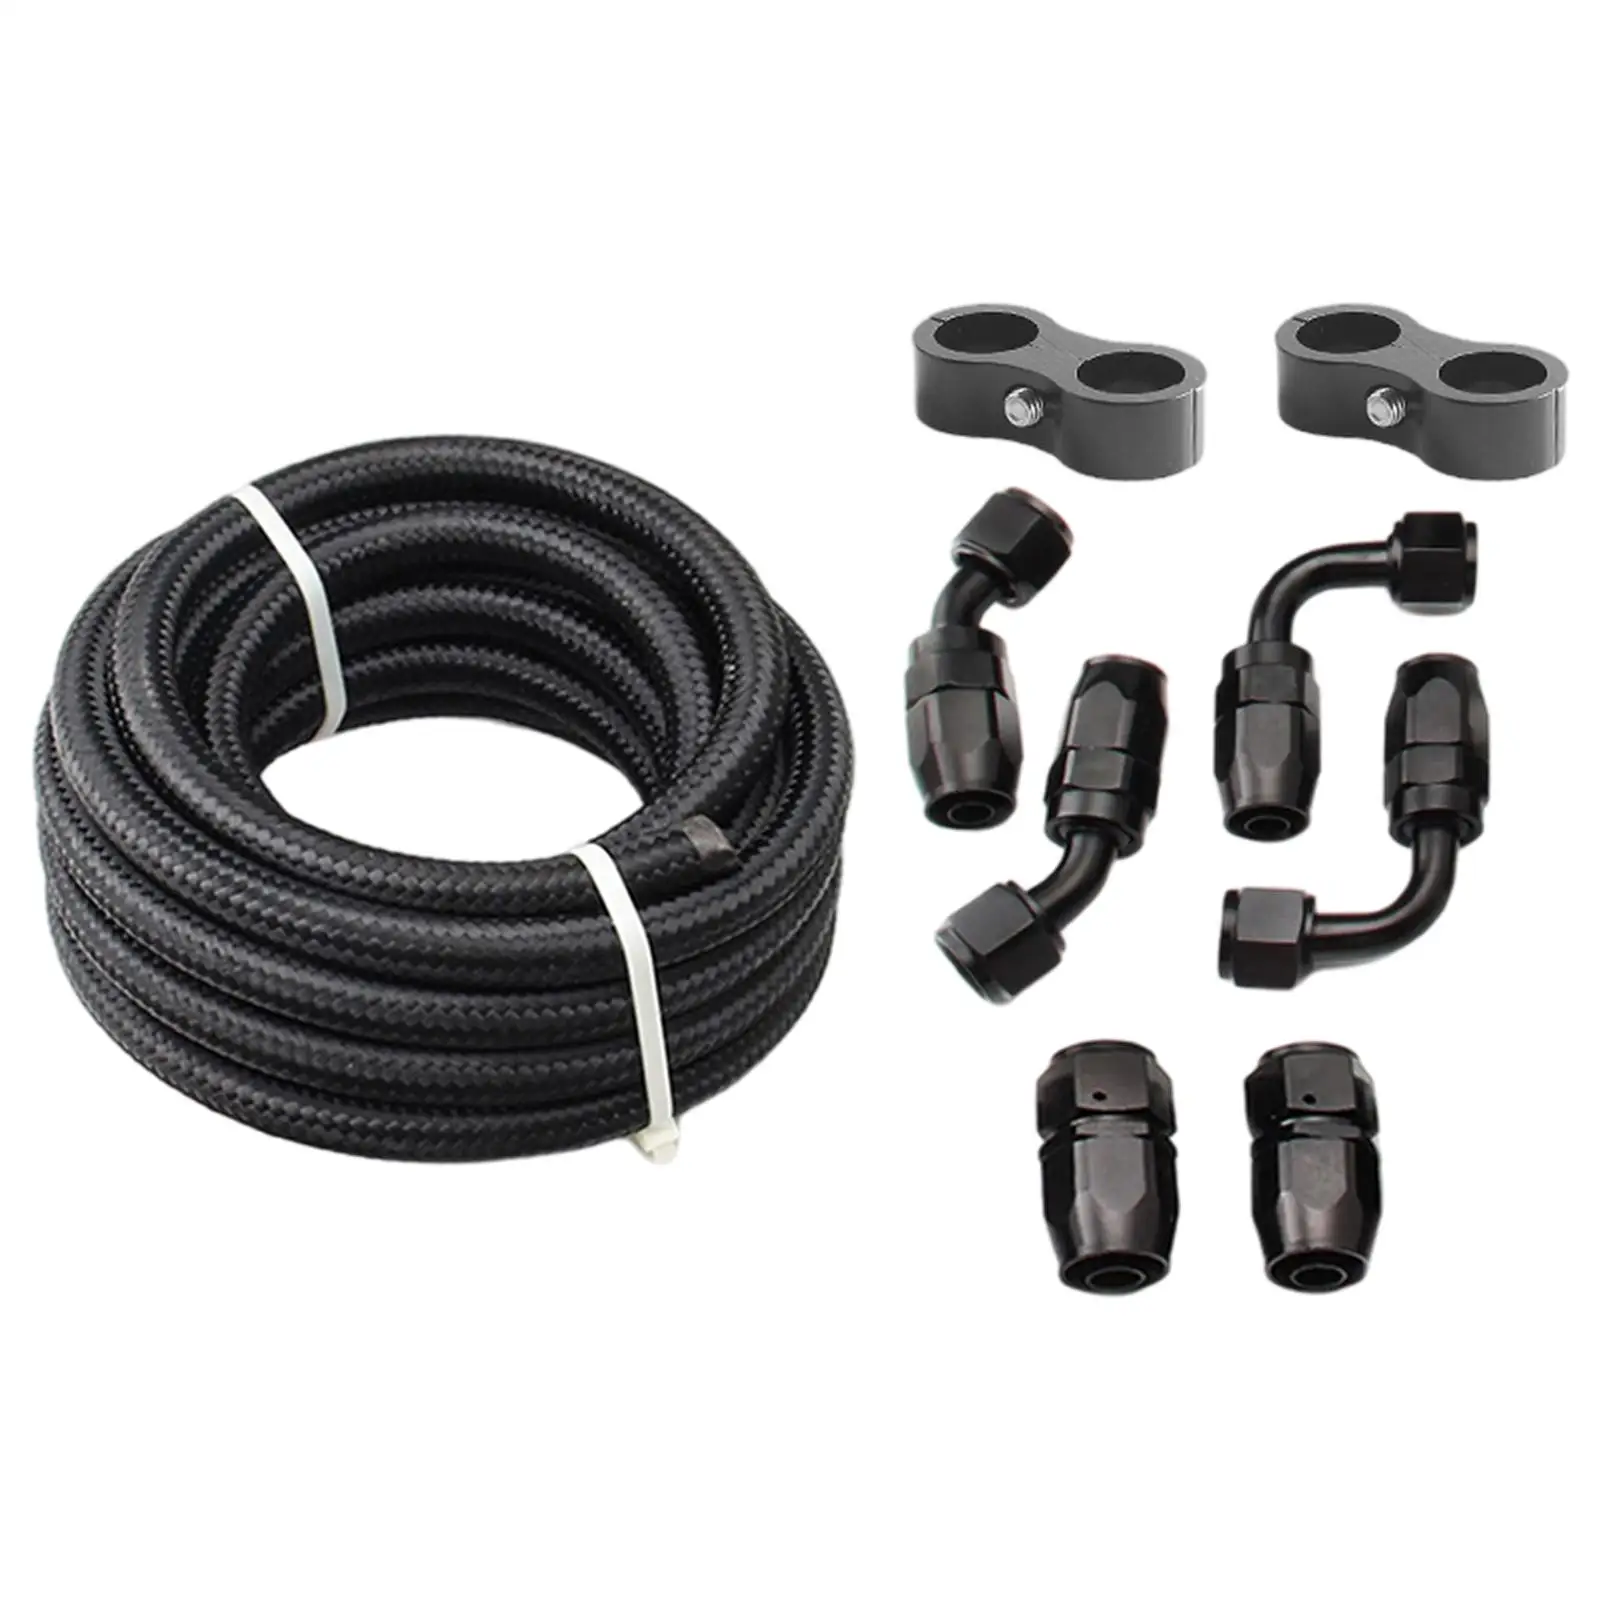 Nylon Braided Fuel Hose Set 0/45/90-Degree Hose Fitting Fit for Pump Gas